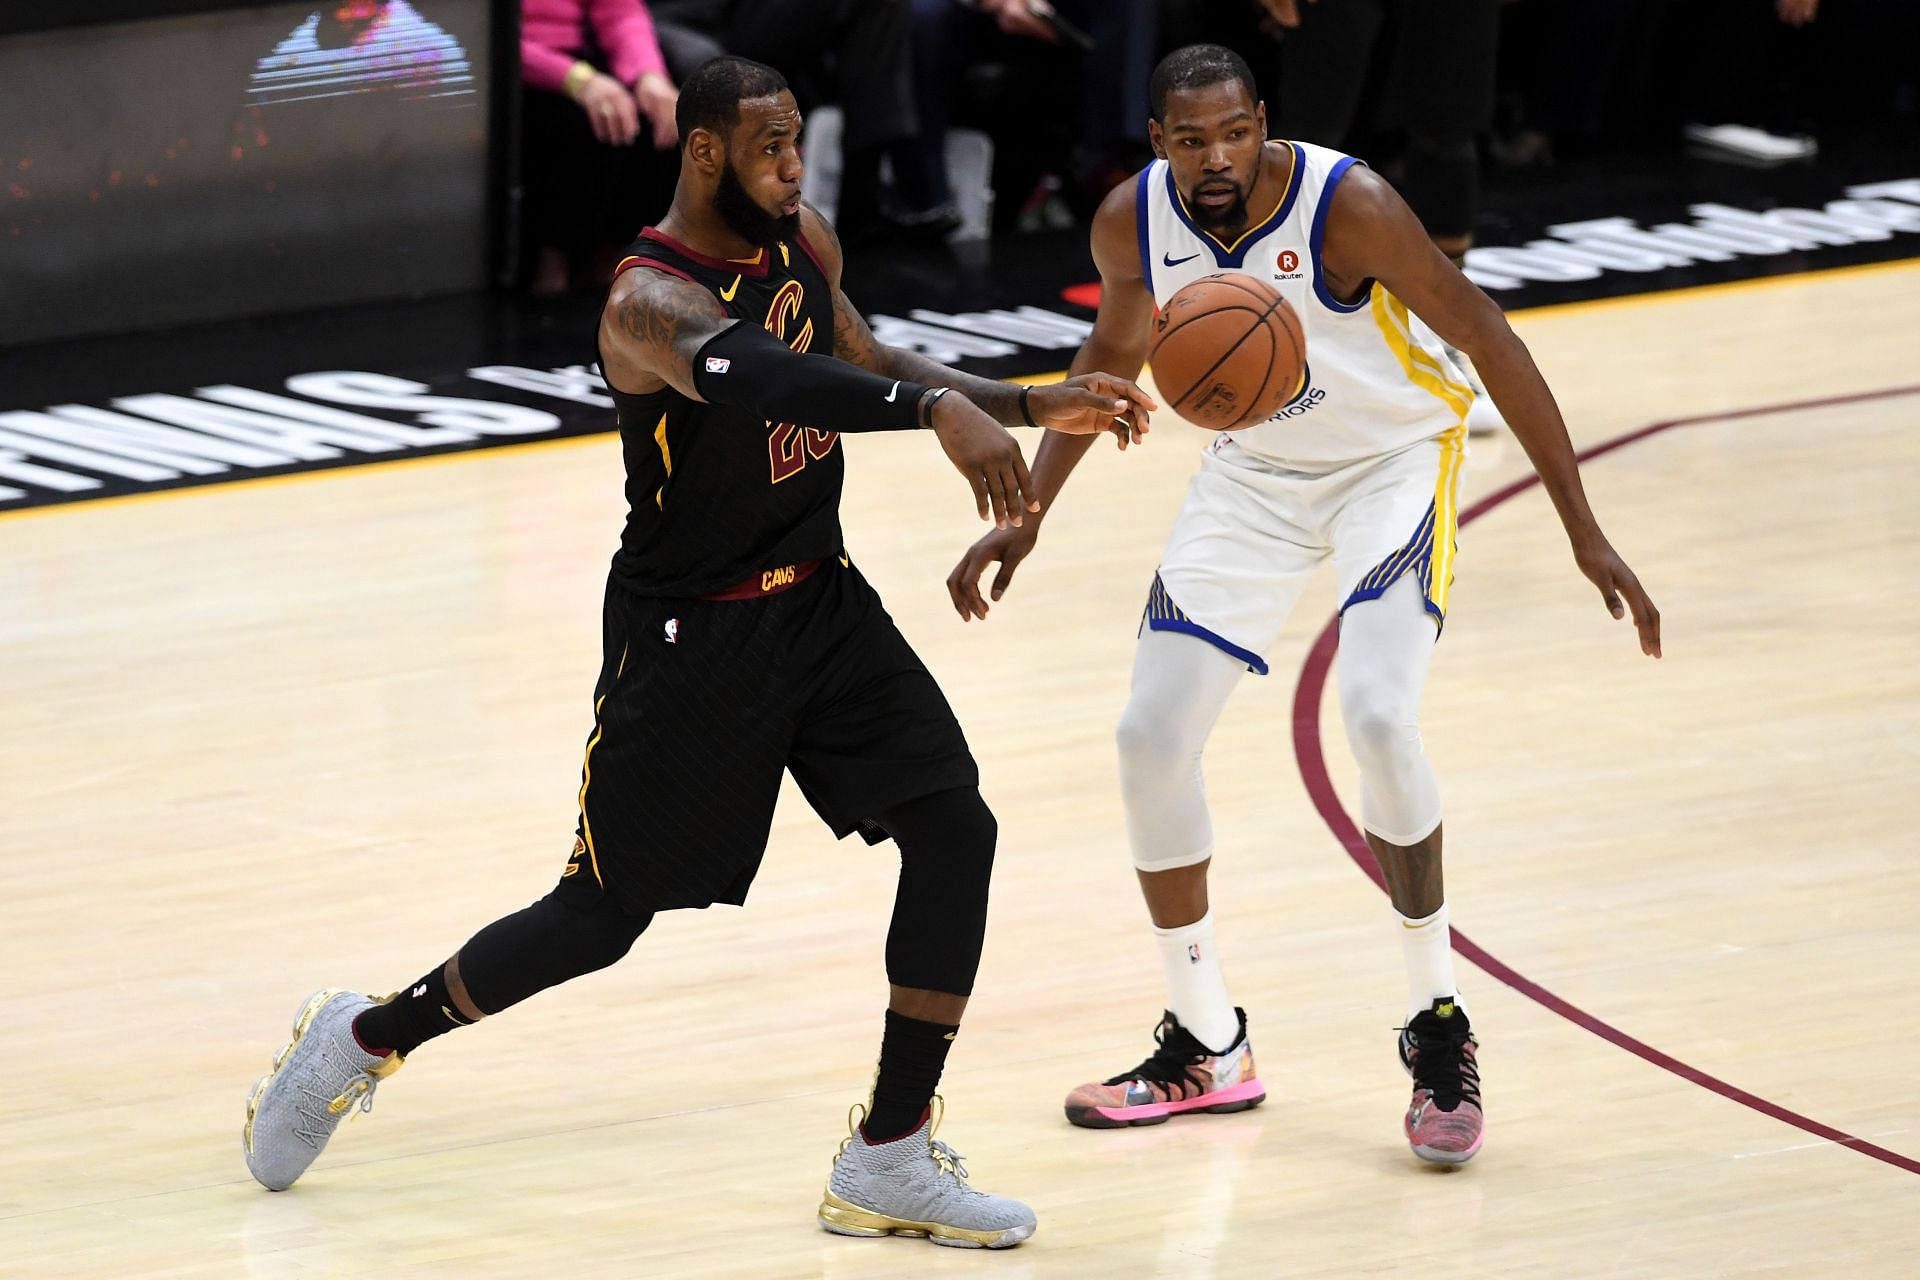 LeBron James and Kevin Durant during the 2018 NBA Finals - Game 3